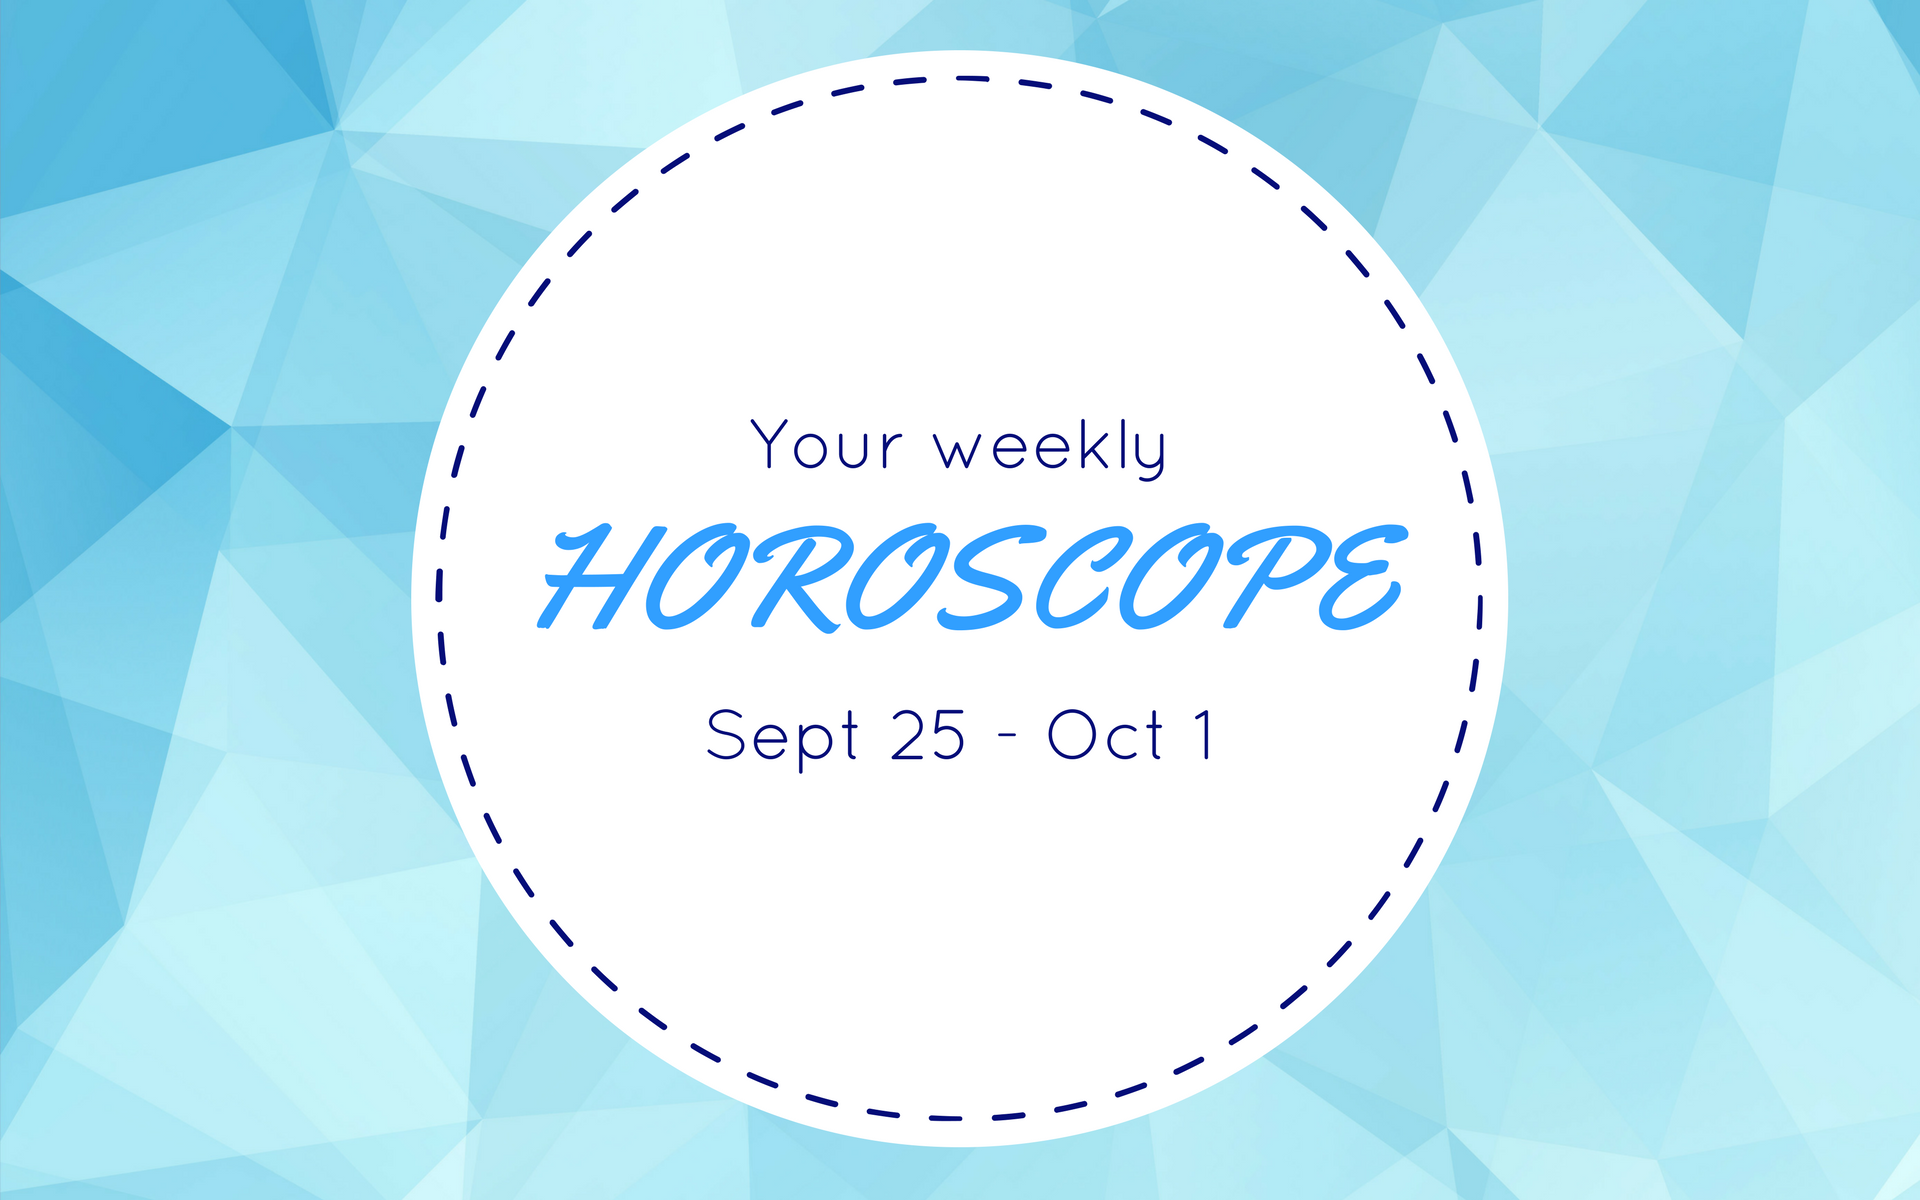 Your Weekly Horoscope: Sept 25 - Oct 1